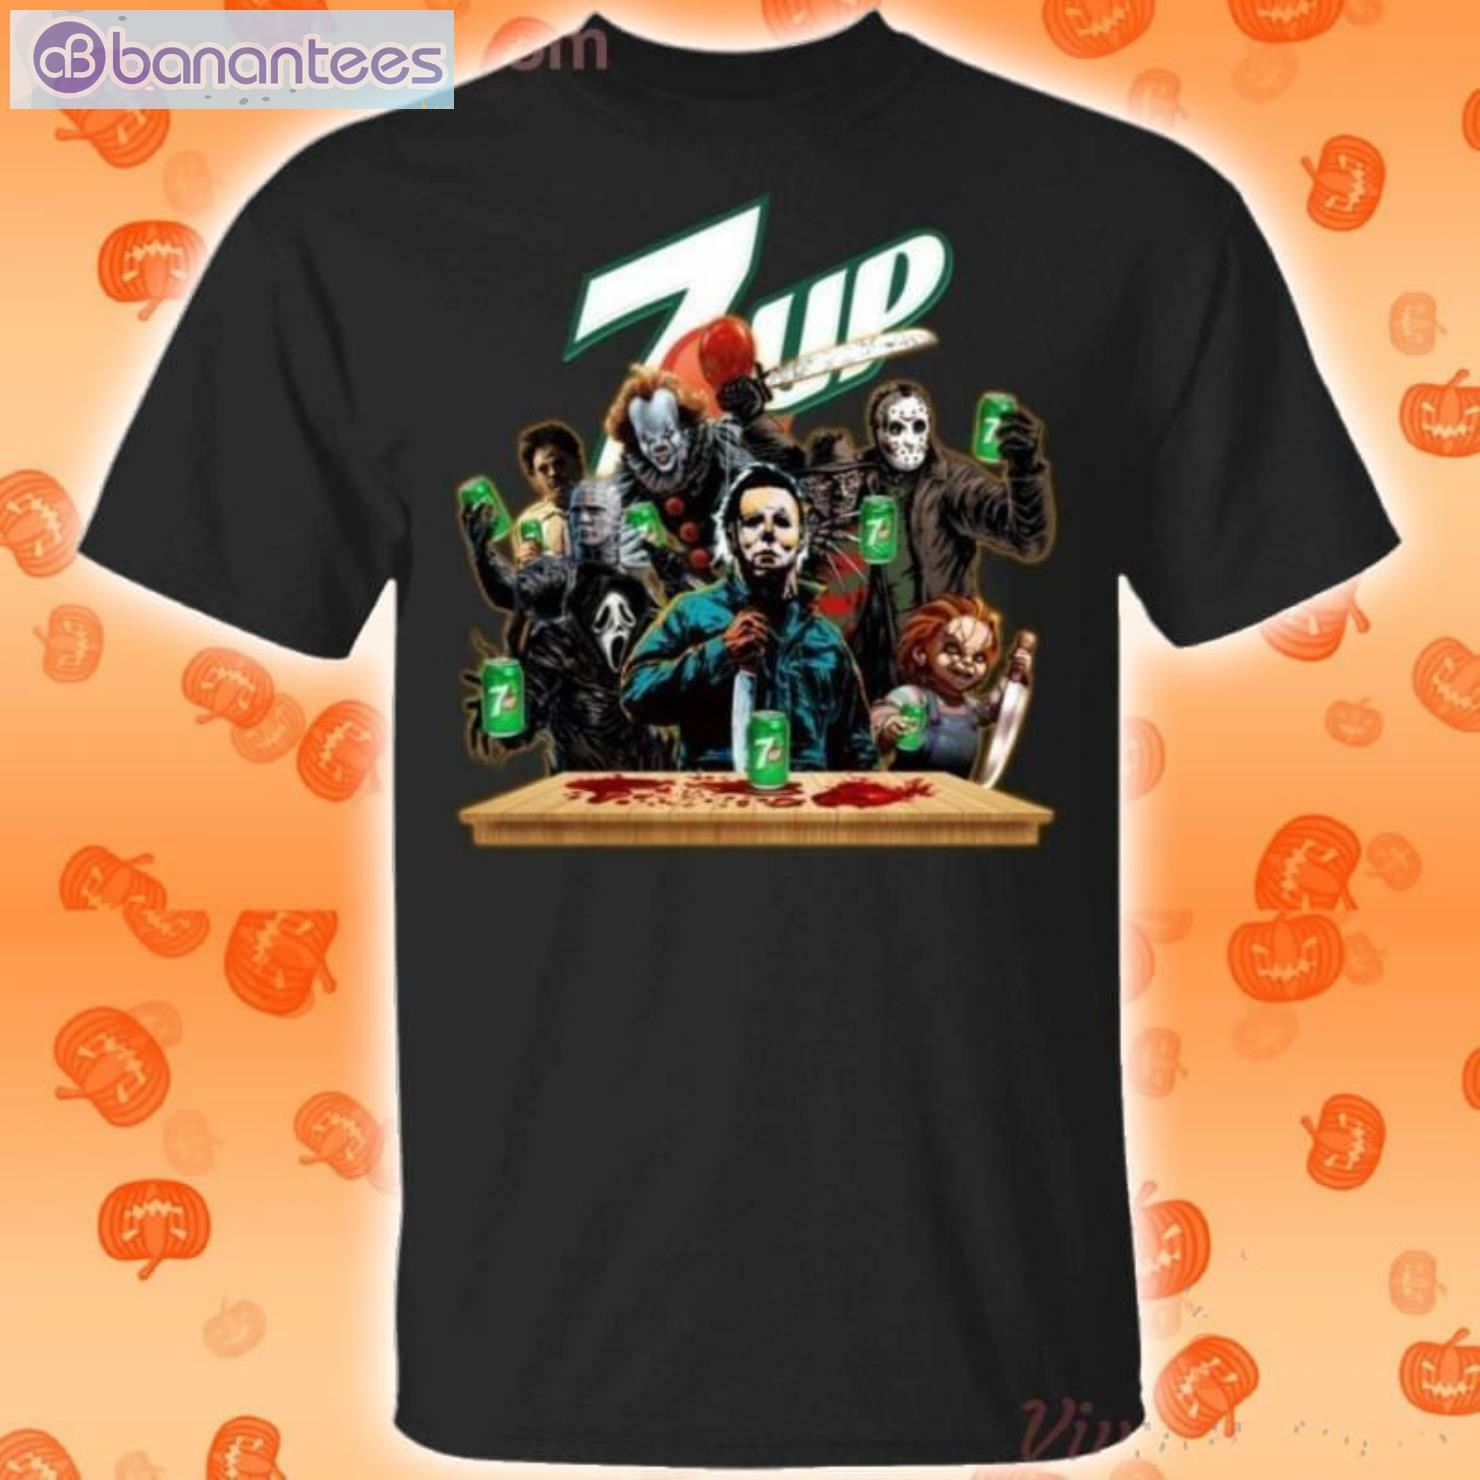 Horror Characters Drinking 7up Funny T-Shirt Product Photo 1 Product photo 1